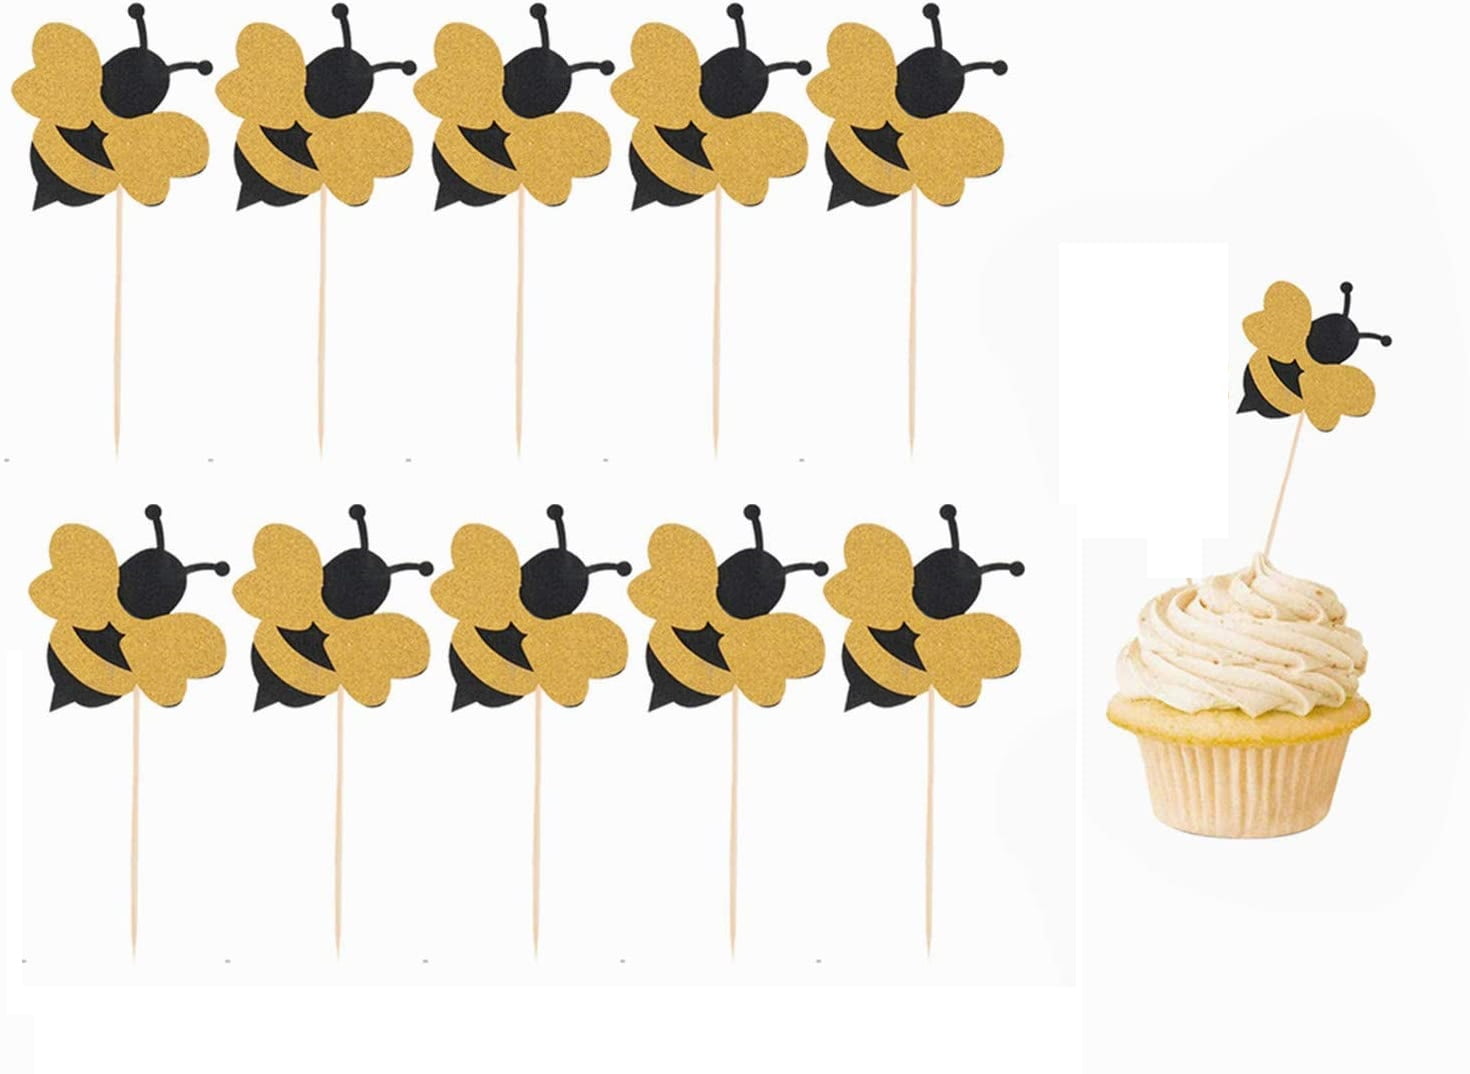 iMagitek 36 Pack Glitter Bumble Bee Cupcake Toppers for Gender Reveal Baby Shower Party Decorations Birthday Party Supplies 